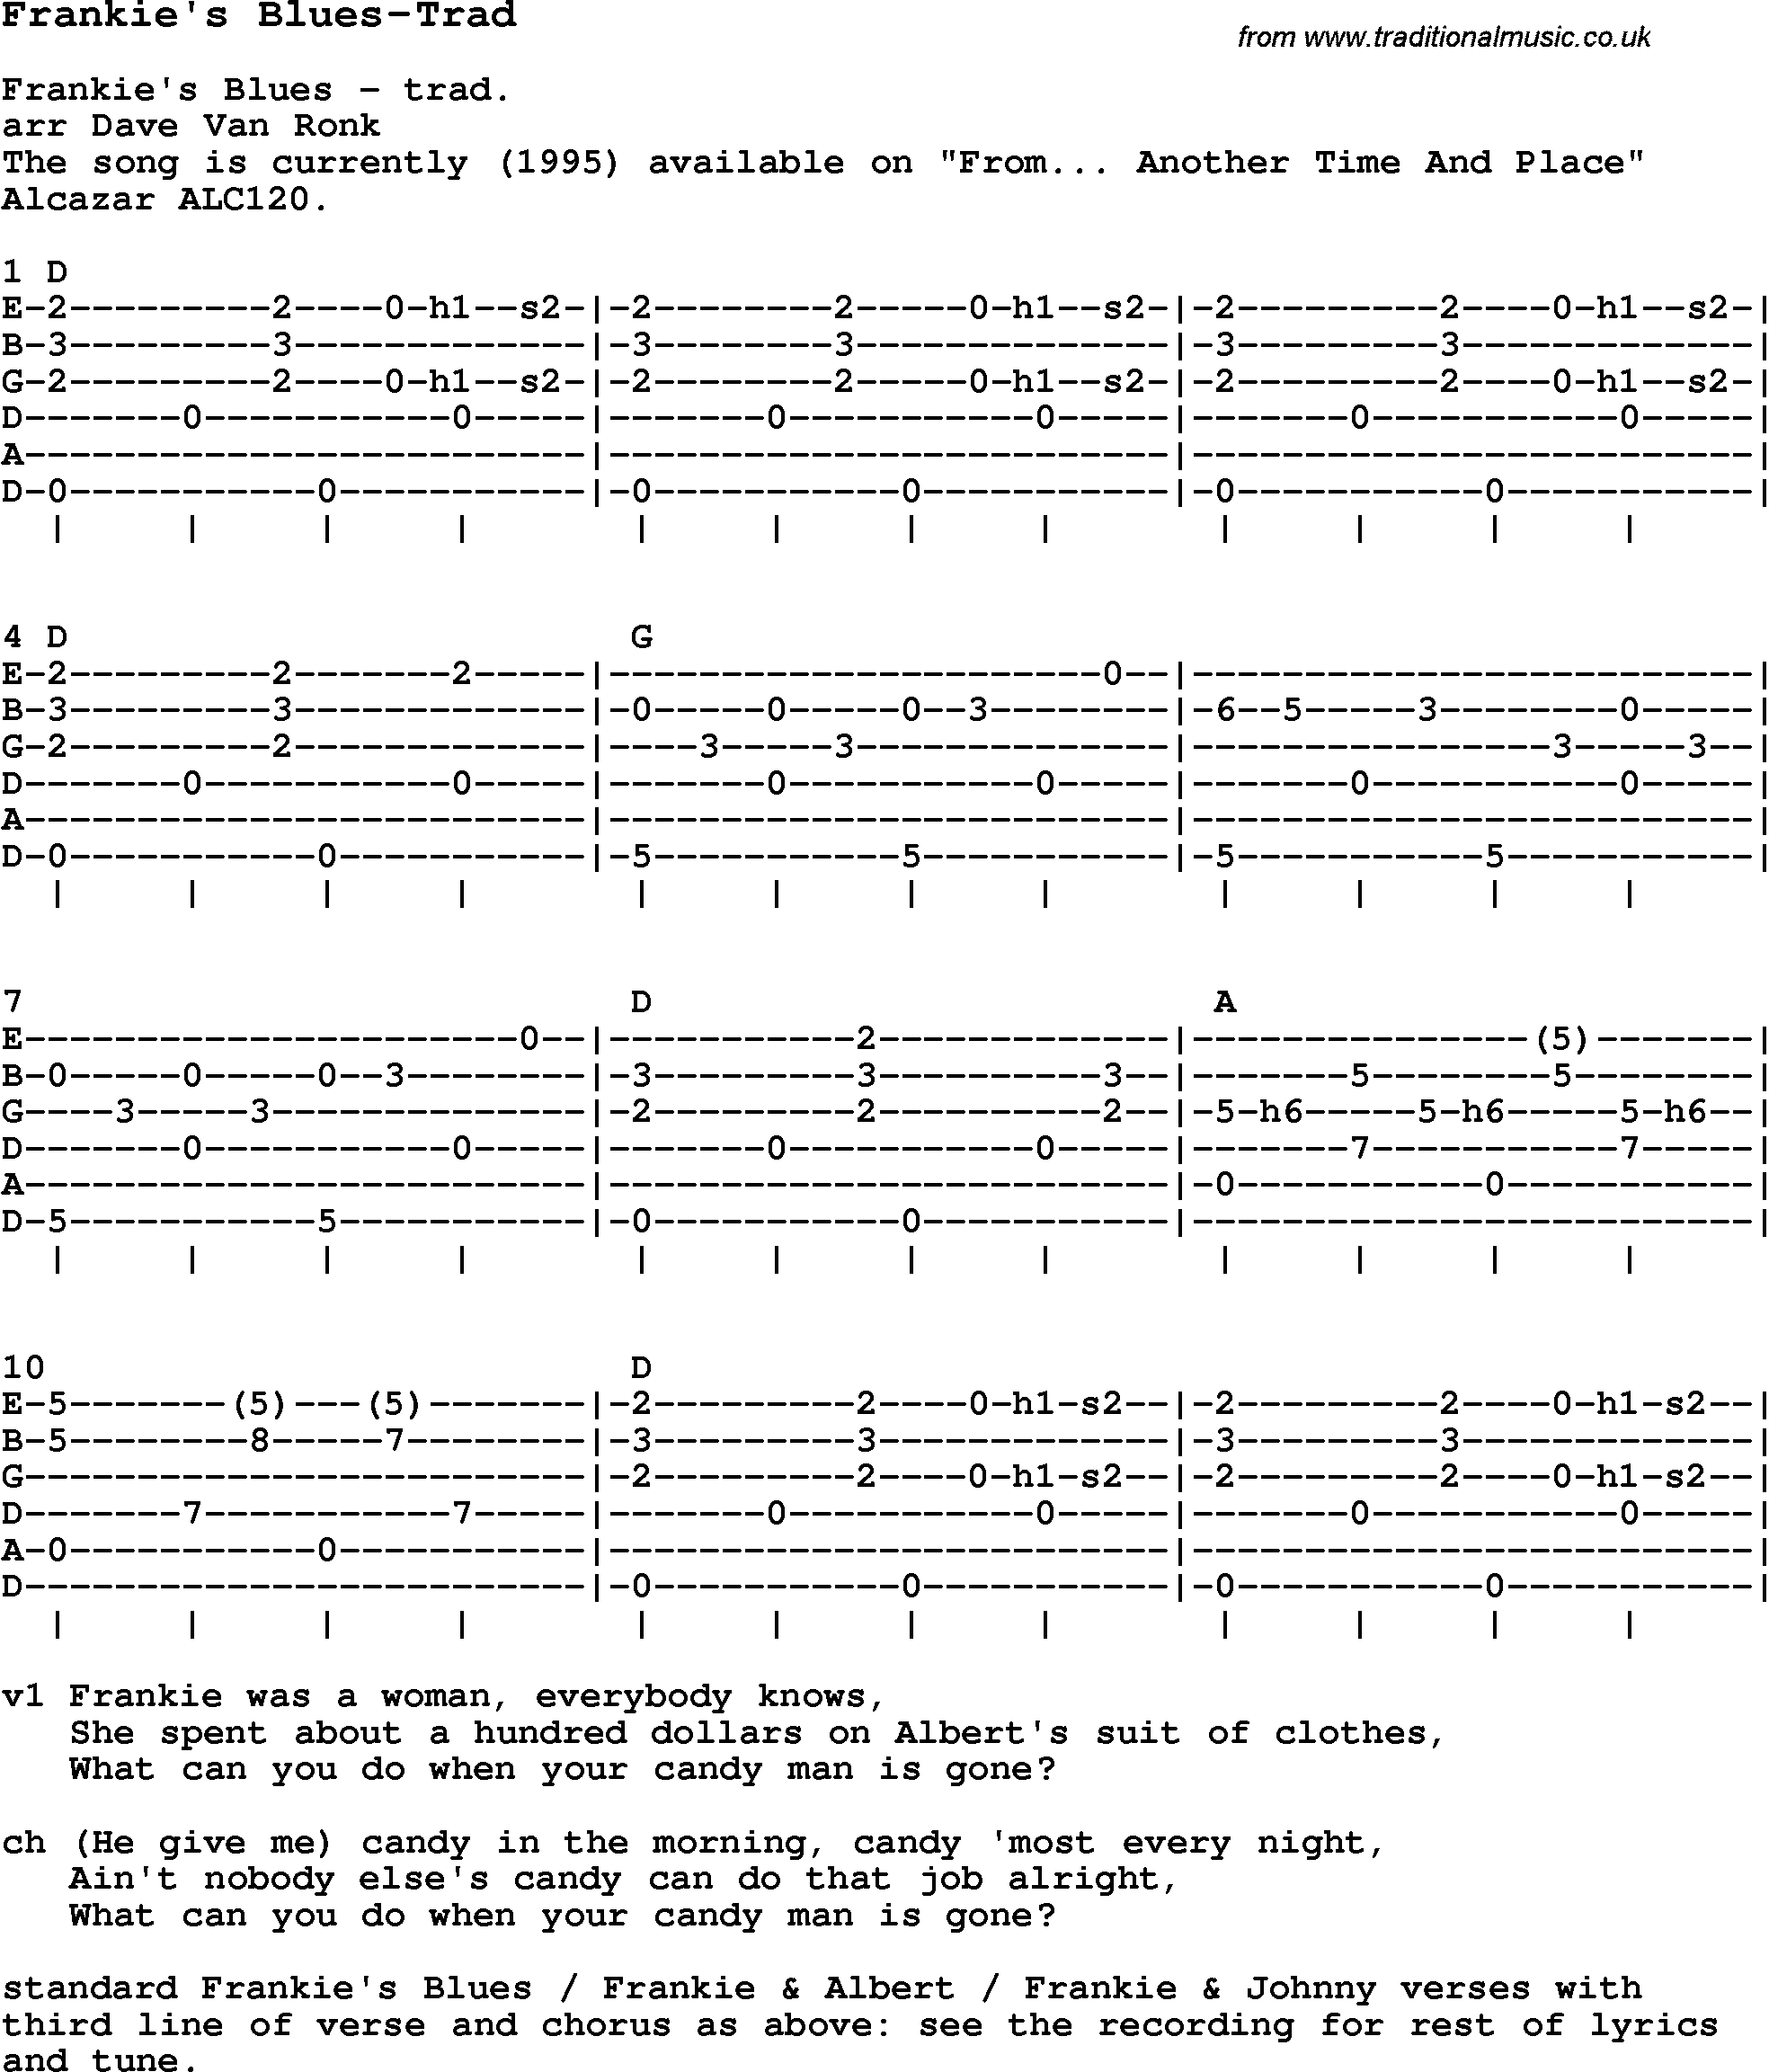 Blues Guitar Song, lyrics, chords, tablature, playing hints for Frankie's Blues-Trad